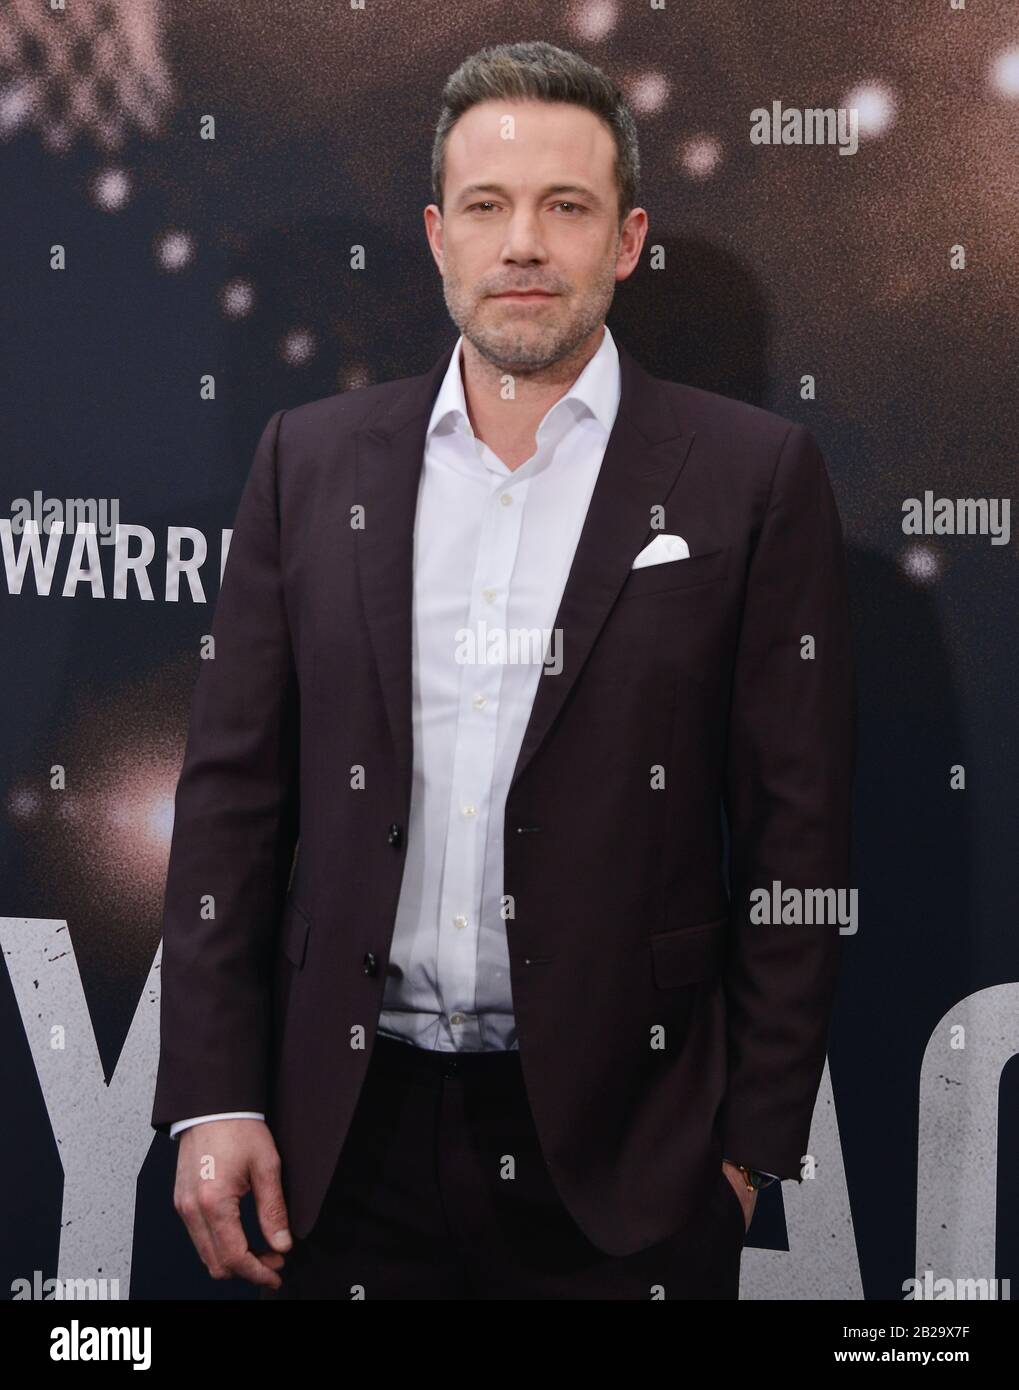 Los Angeles, USA. 01st Mar, 2020. a  Ben Affleck 004 attend the premiere of Warner Bros Pictures' ' The Way Back' at Regal LA Live on March 01, 2020 in Los Angeles, California. Credit: Tsuni/USA/Alamy Live News Stock Photo